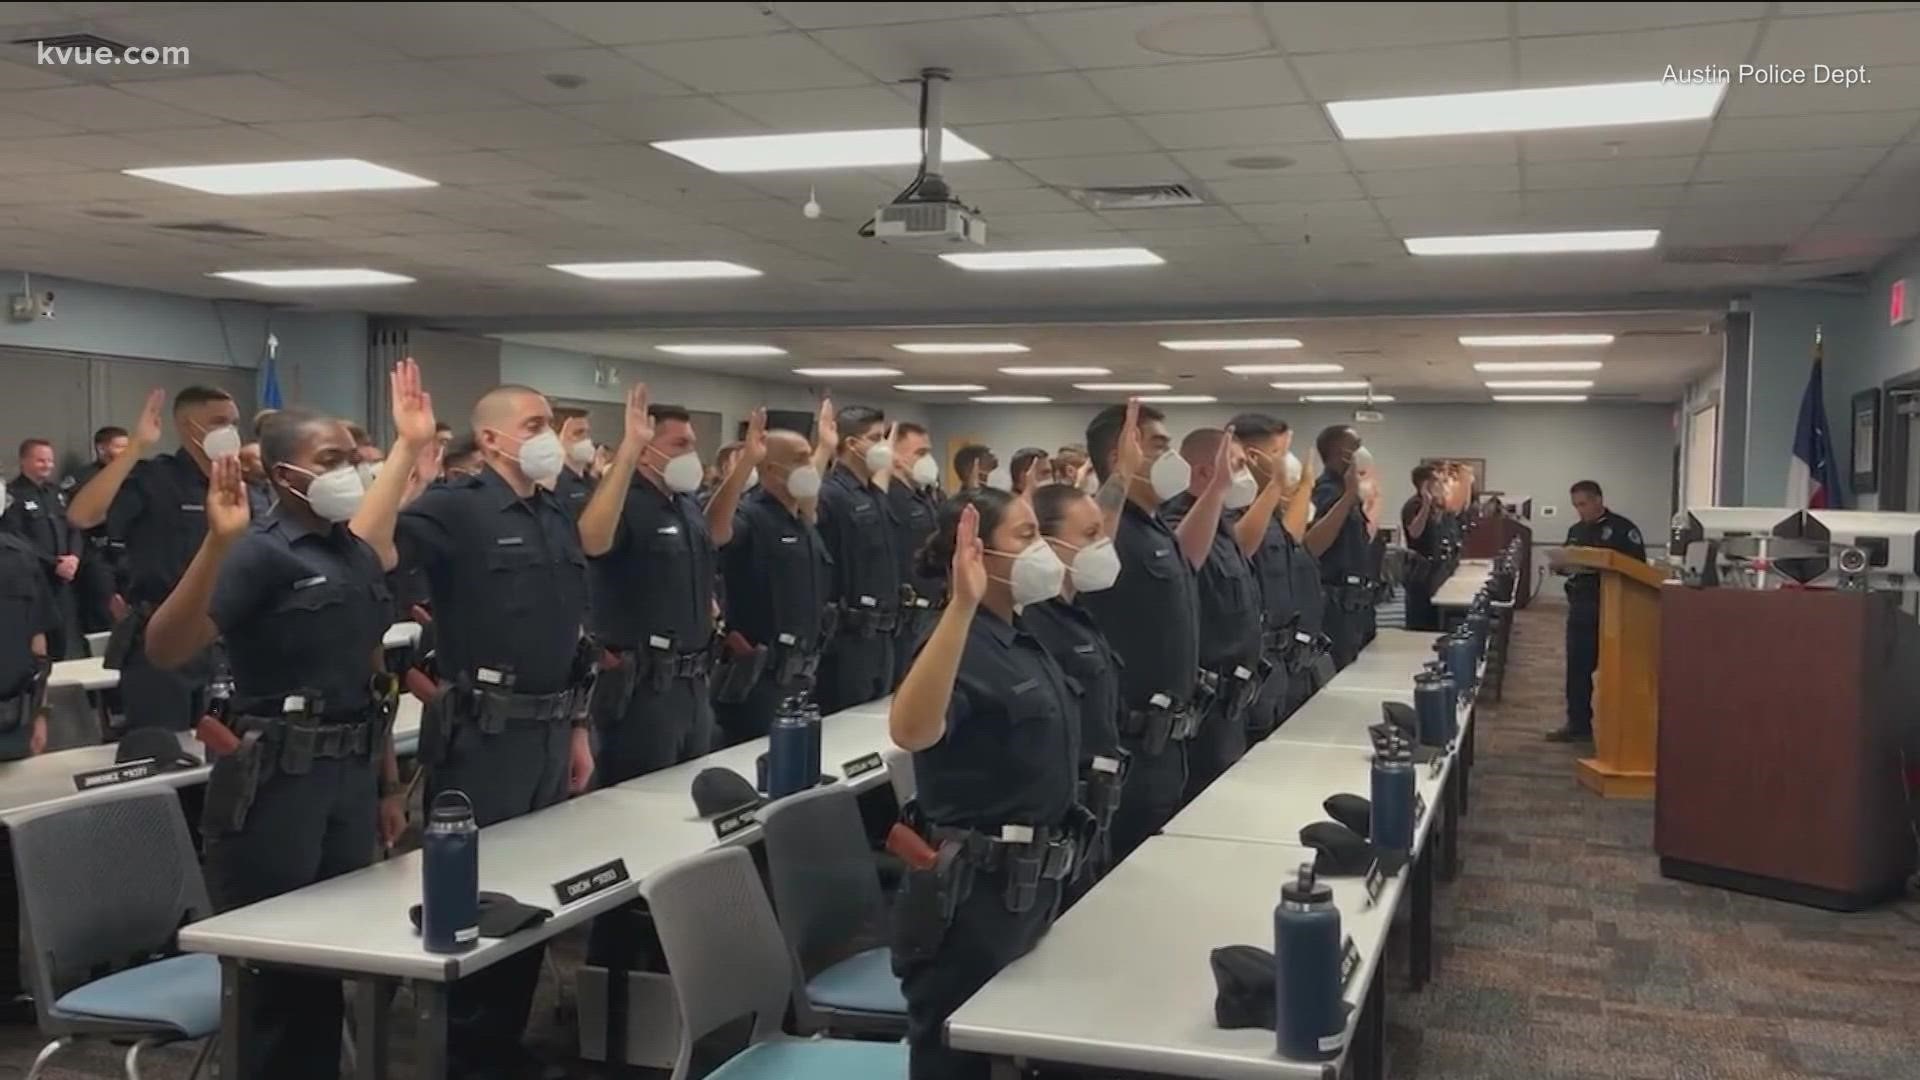 Dozens more officers will soon be added to the Austin Police Department. APD's 144th cadet class is set to graduate on Friday.